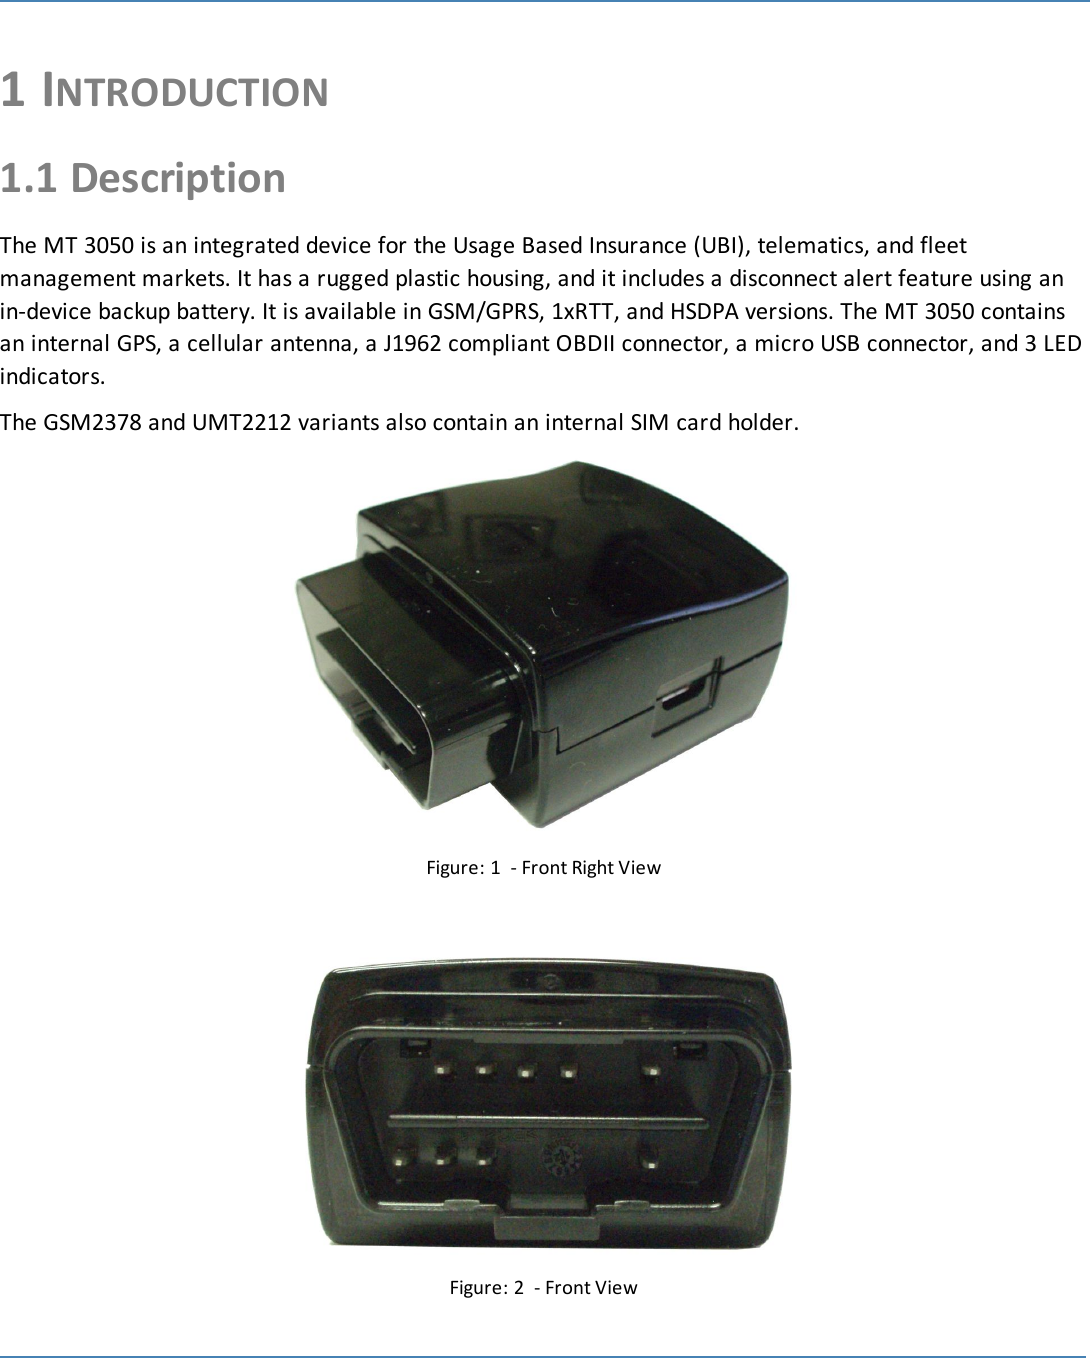 11 INTRODUCTION1.1 DescriptionThe MT 3050 is an integrated device for the Usage Based Insurance (UBI), telematics, and fleetmanagement markets. It has a rugged plastic housing, and it includes a disconnect alert feature using anin-device backup battery. It is available in GSM/GPRS, 1xRTT, and HSDPA versions. The MT 3050 containsan internal GPS, a cellular antenna, a J1962 compliant OBDII connector, a micro USB connector, and 3 LEDindicators.The GSM2378 and UMT2212 variants also contain an internal SIM card holder.Figure: 1 - Front Right ViewFigure: 2 - Front View